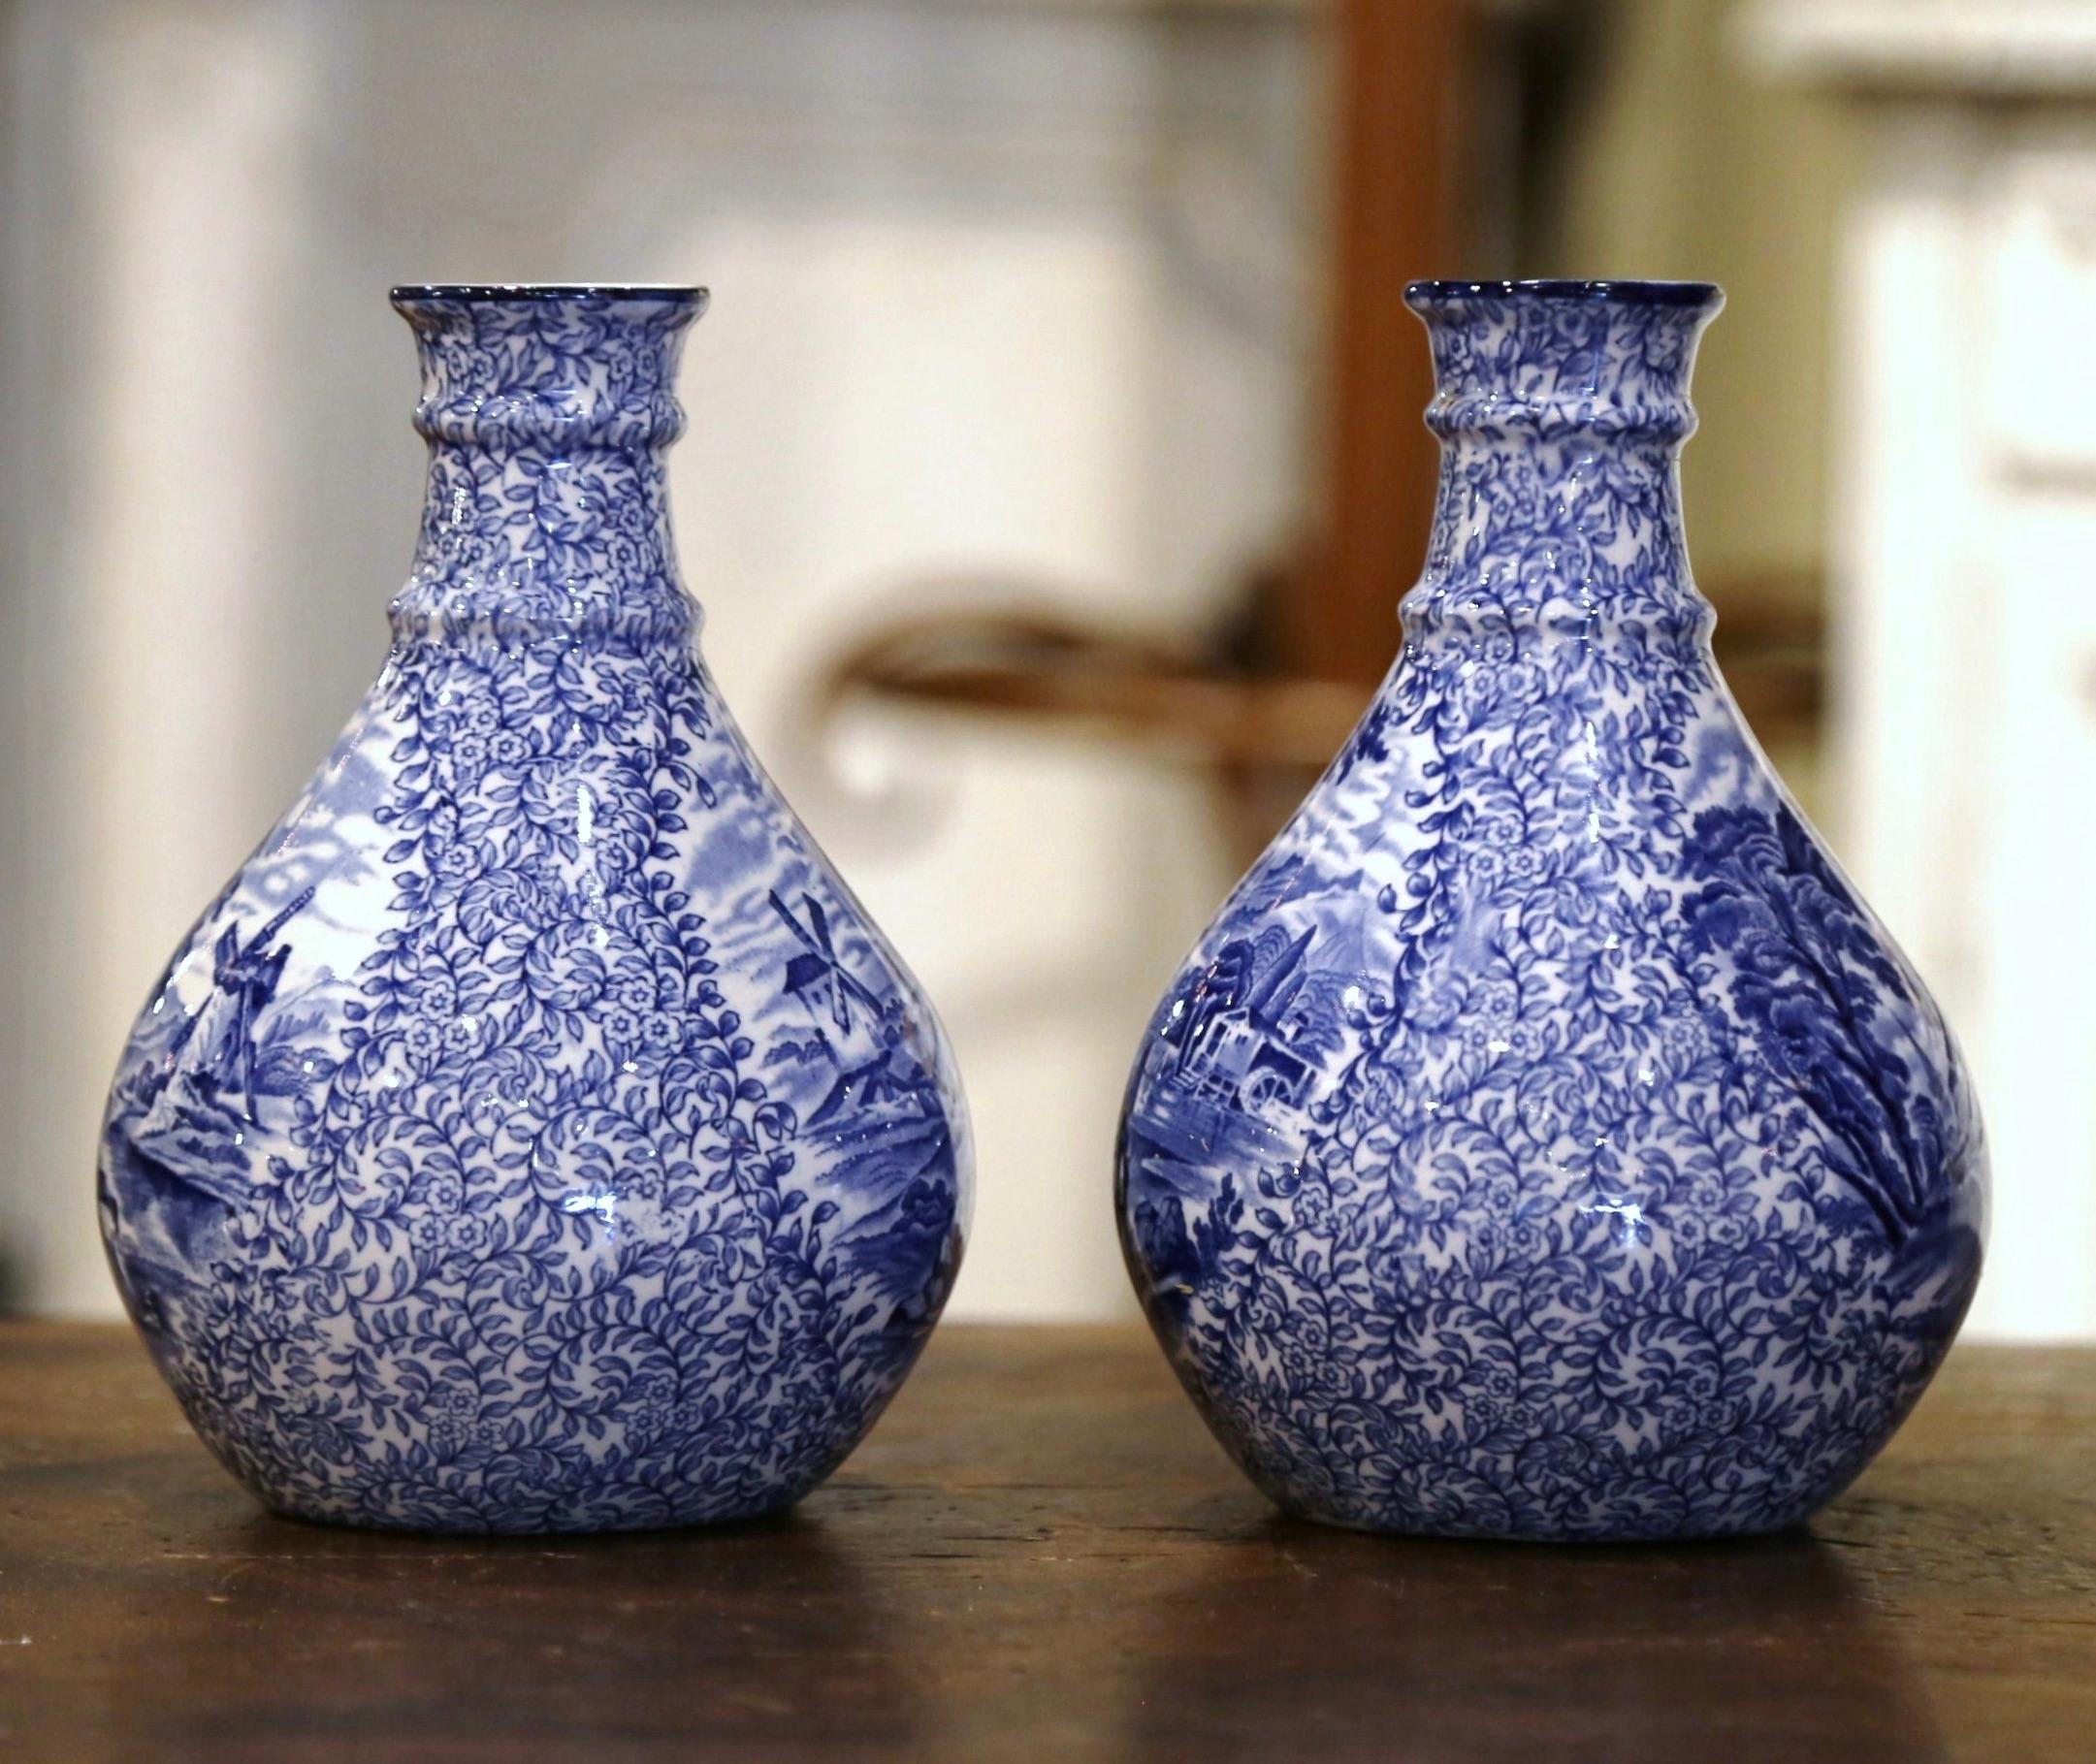 Pair of Early 20th Century English Blue and White Painted Faience Delft Vases 1